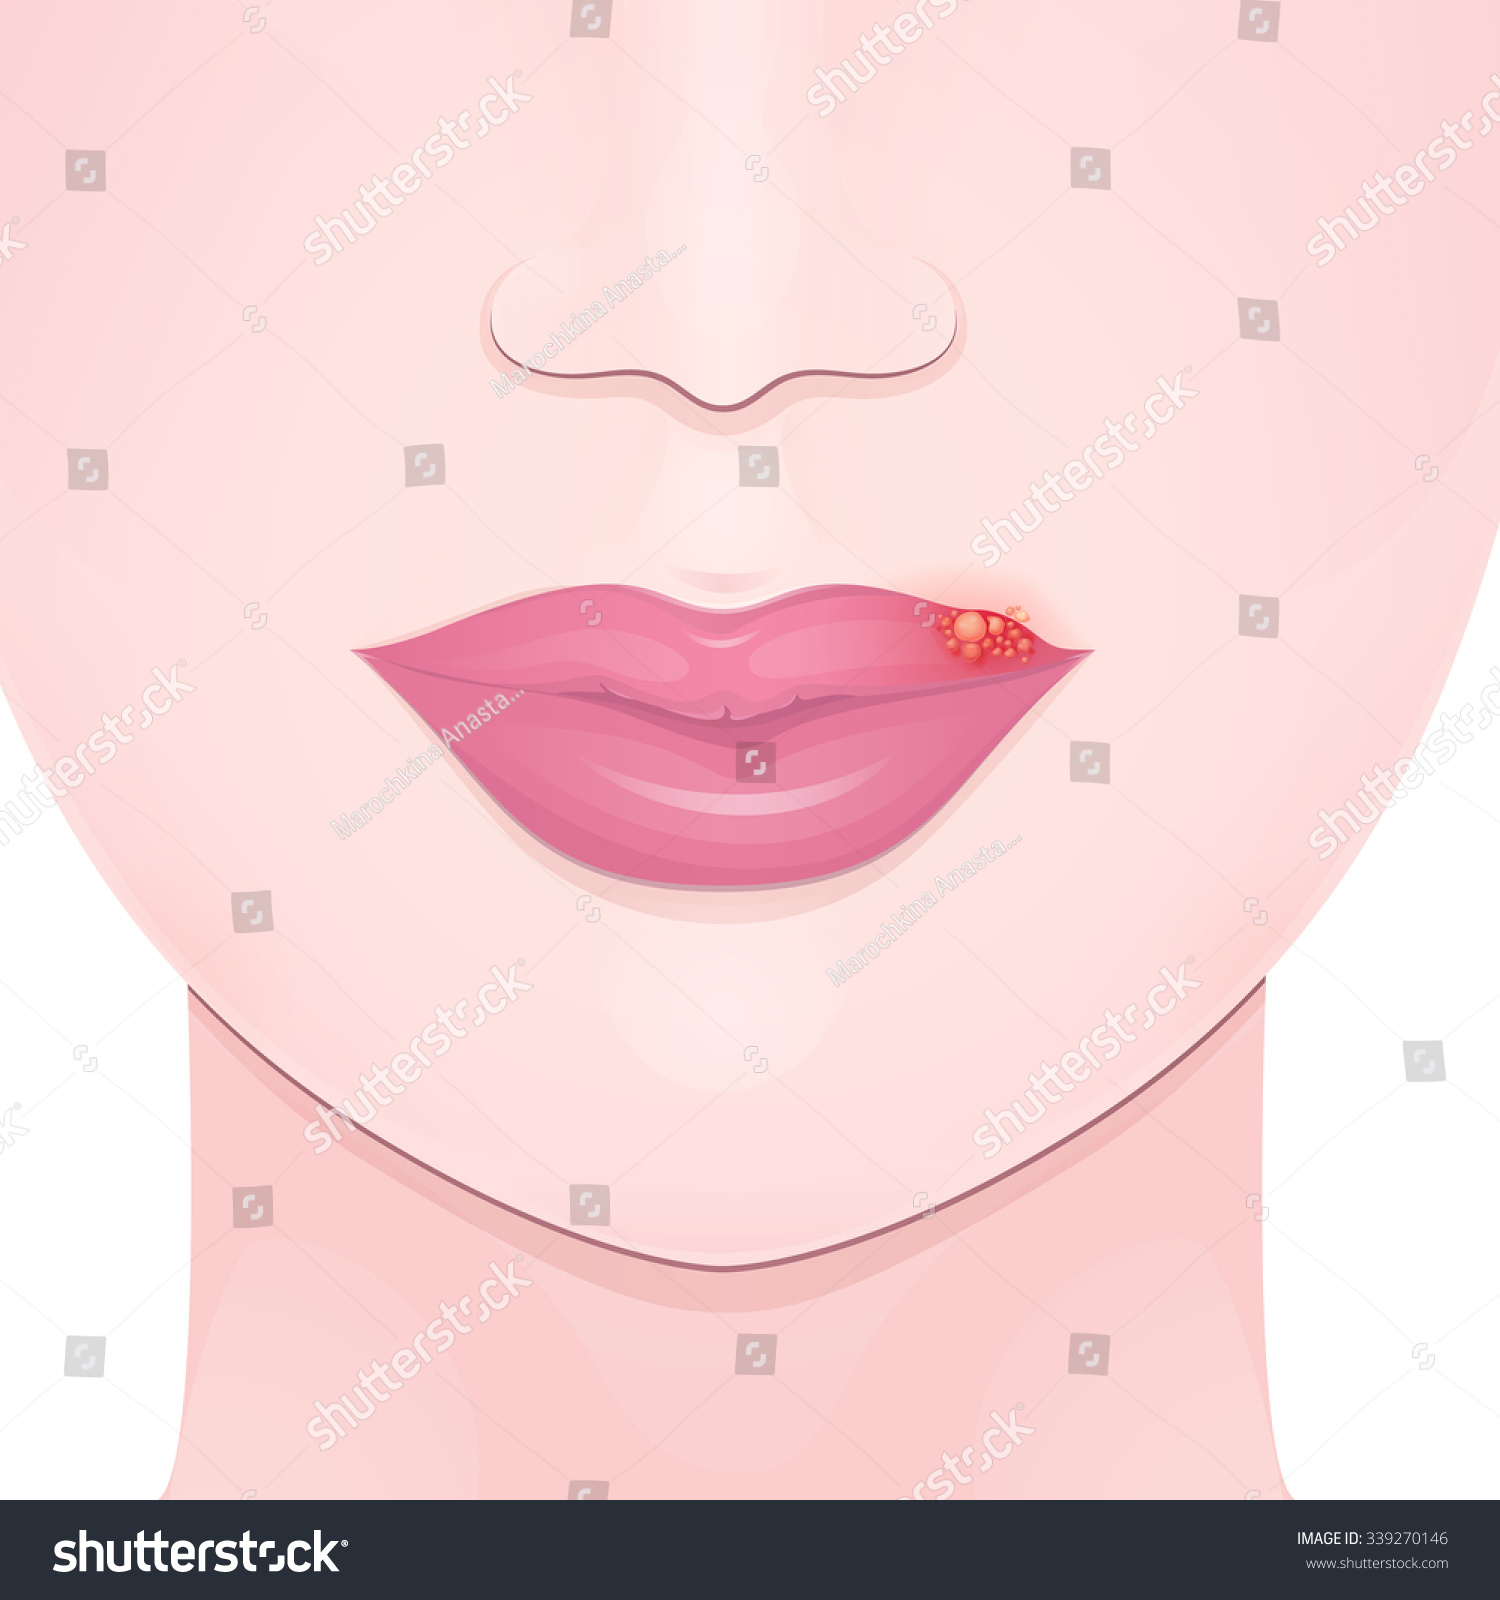 Herpes Closeup Lips Cold Sore Upper Stock Vector Royalty Free